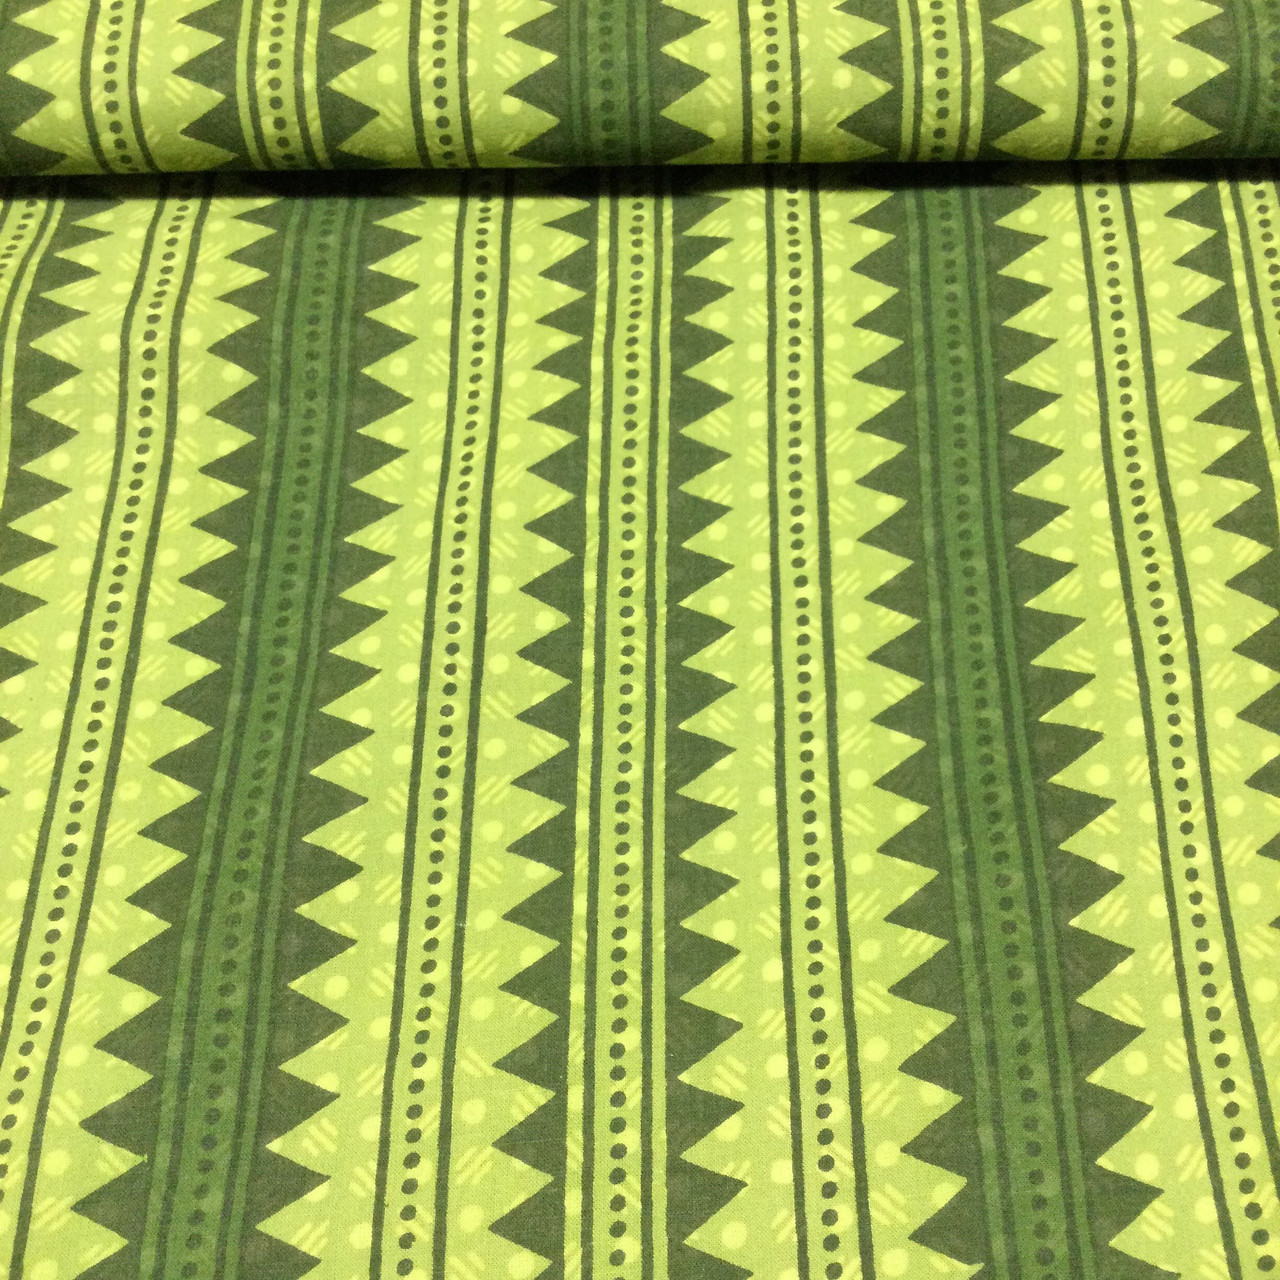 44/45 Kahki Woven Ticking Fabric By The Yard [KHAKI-WOVENTICK] - $5.49 :  , Burlap for Wedding and Special Events